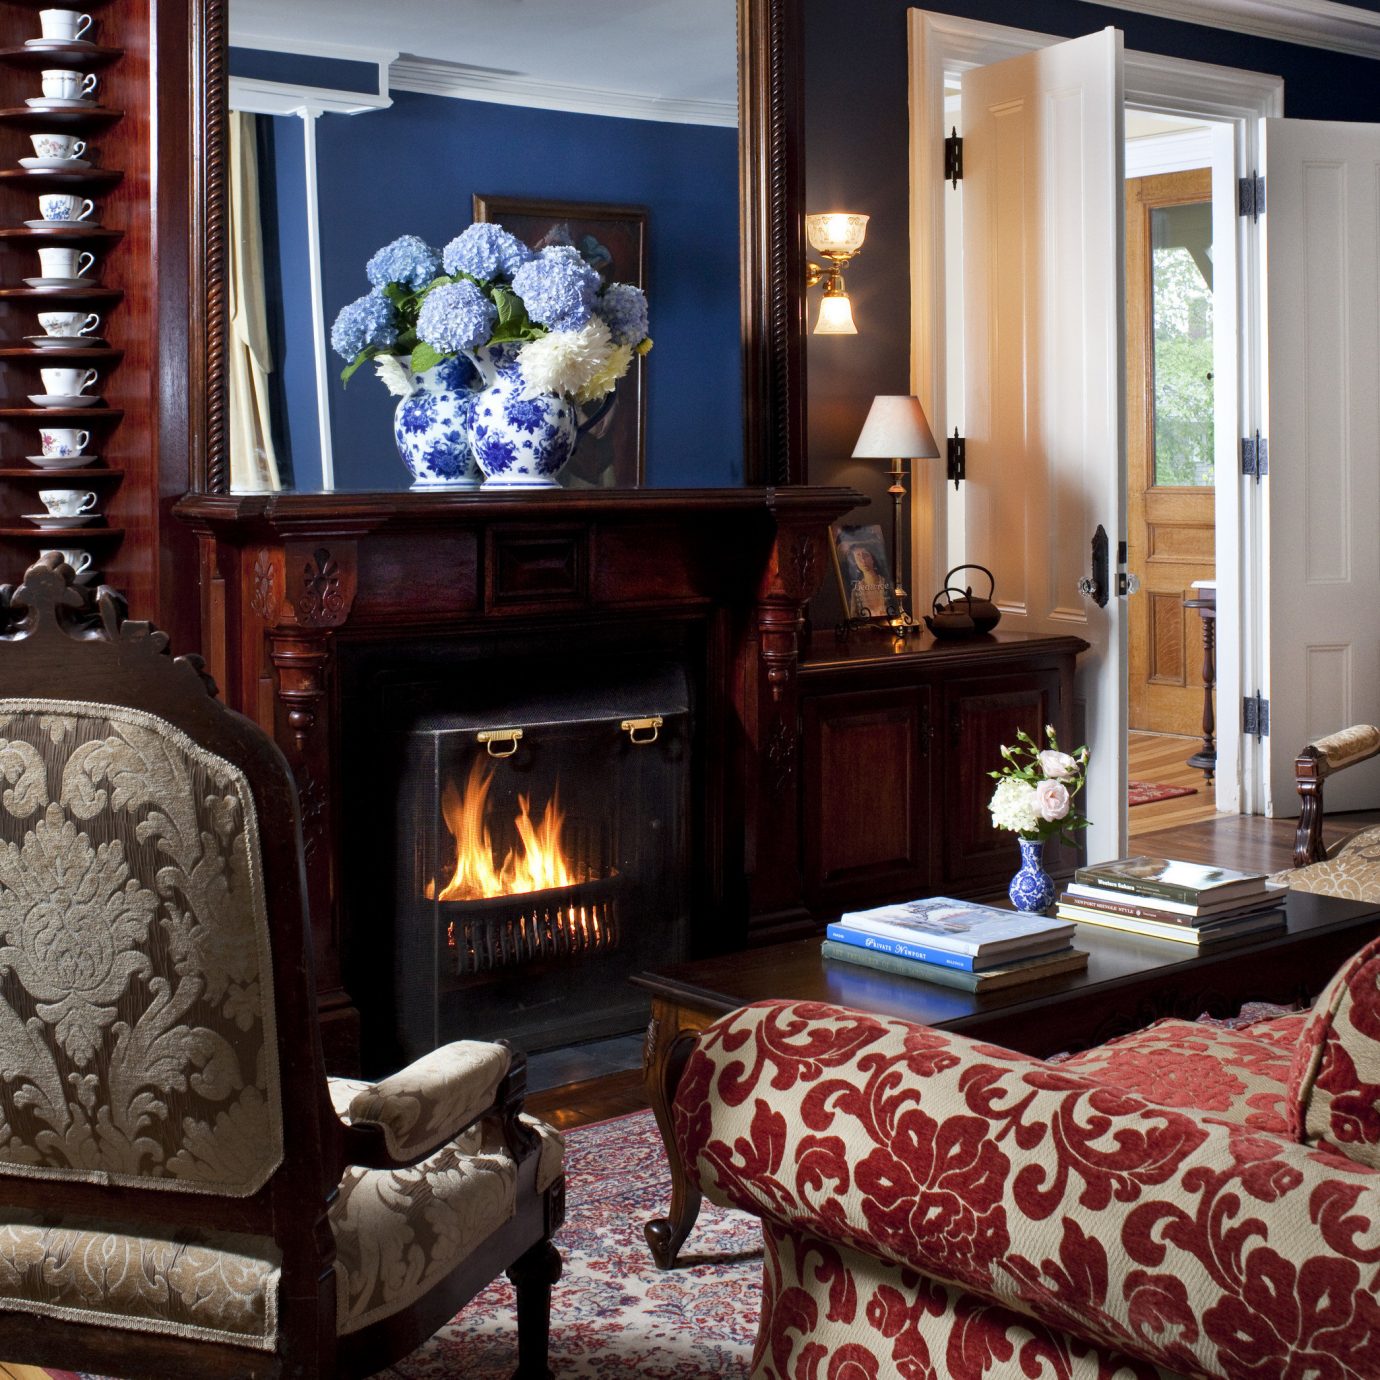 Boutique Hotels Hotels Romantic Getaways Romantic Hotels Fireplace living room fire home